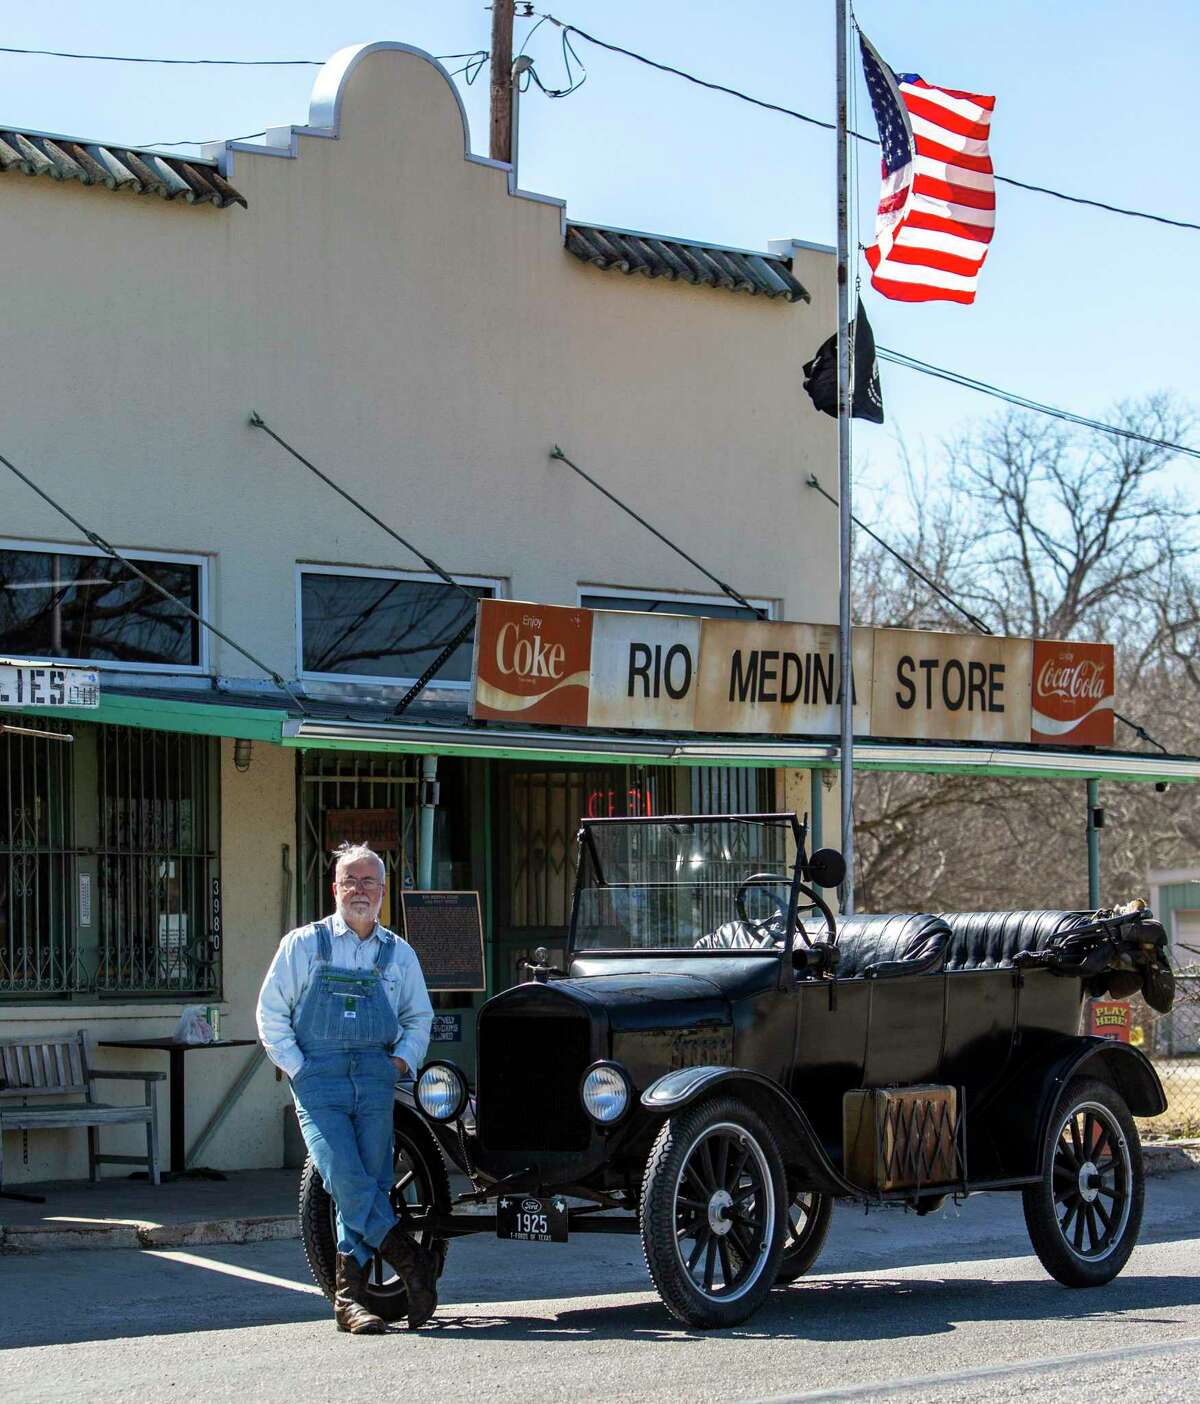 Hugh Hemphill, president of the San Antonio Ford Model T Club, poses with his car in front of the Rio Medina Store.